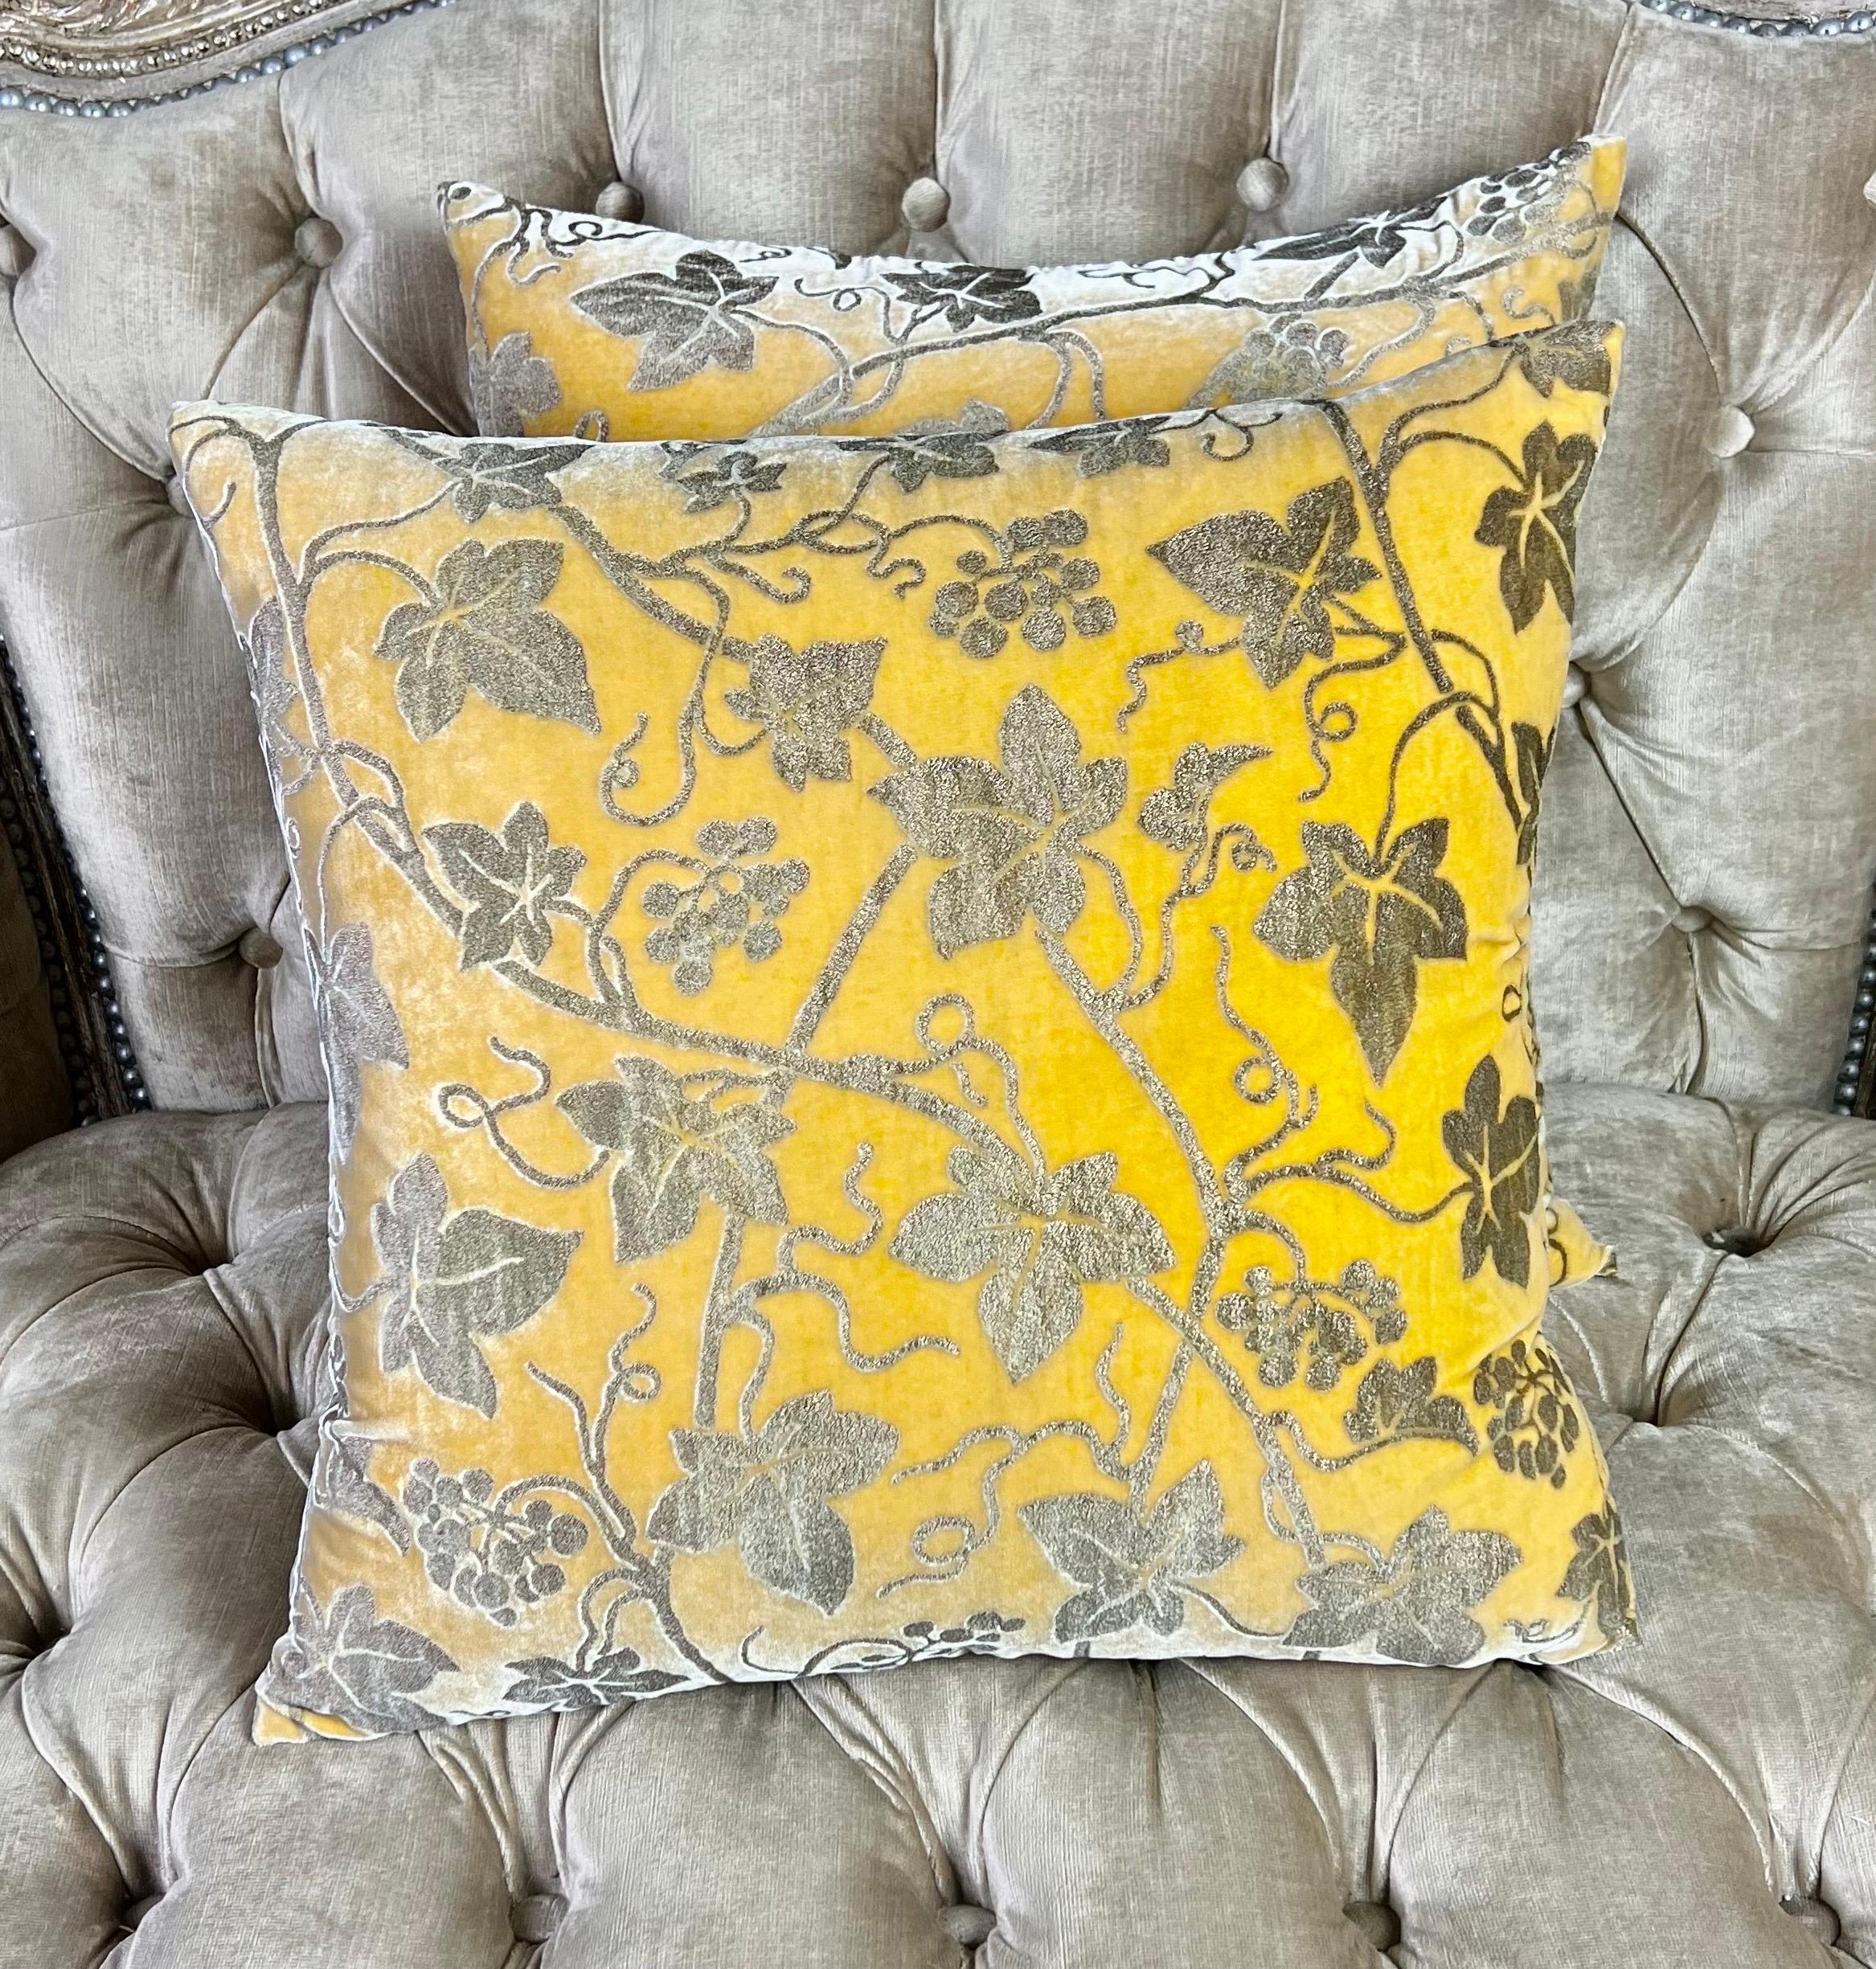 Pair of custom pillows made with rare printed silk velvet by Mariano Fortuny in the Edera pattern depicting twirling vines and grapes.  The yellow is beautiful and vibrant and would add a great accent of color in your room.  The pillows have